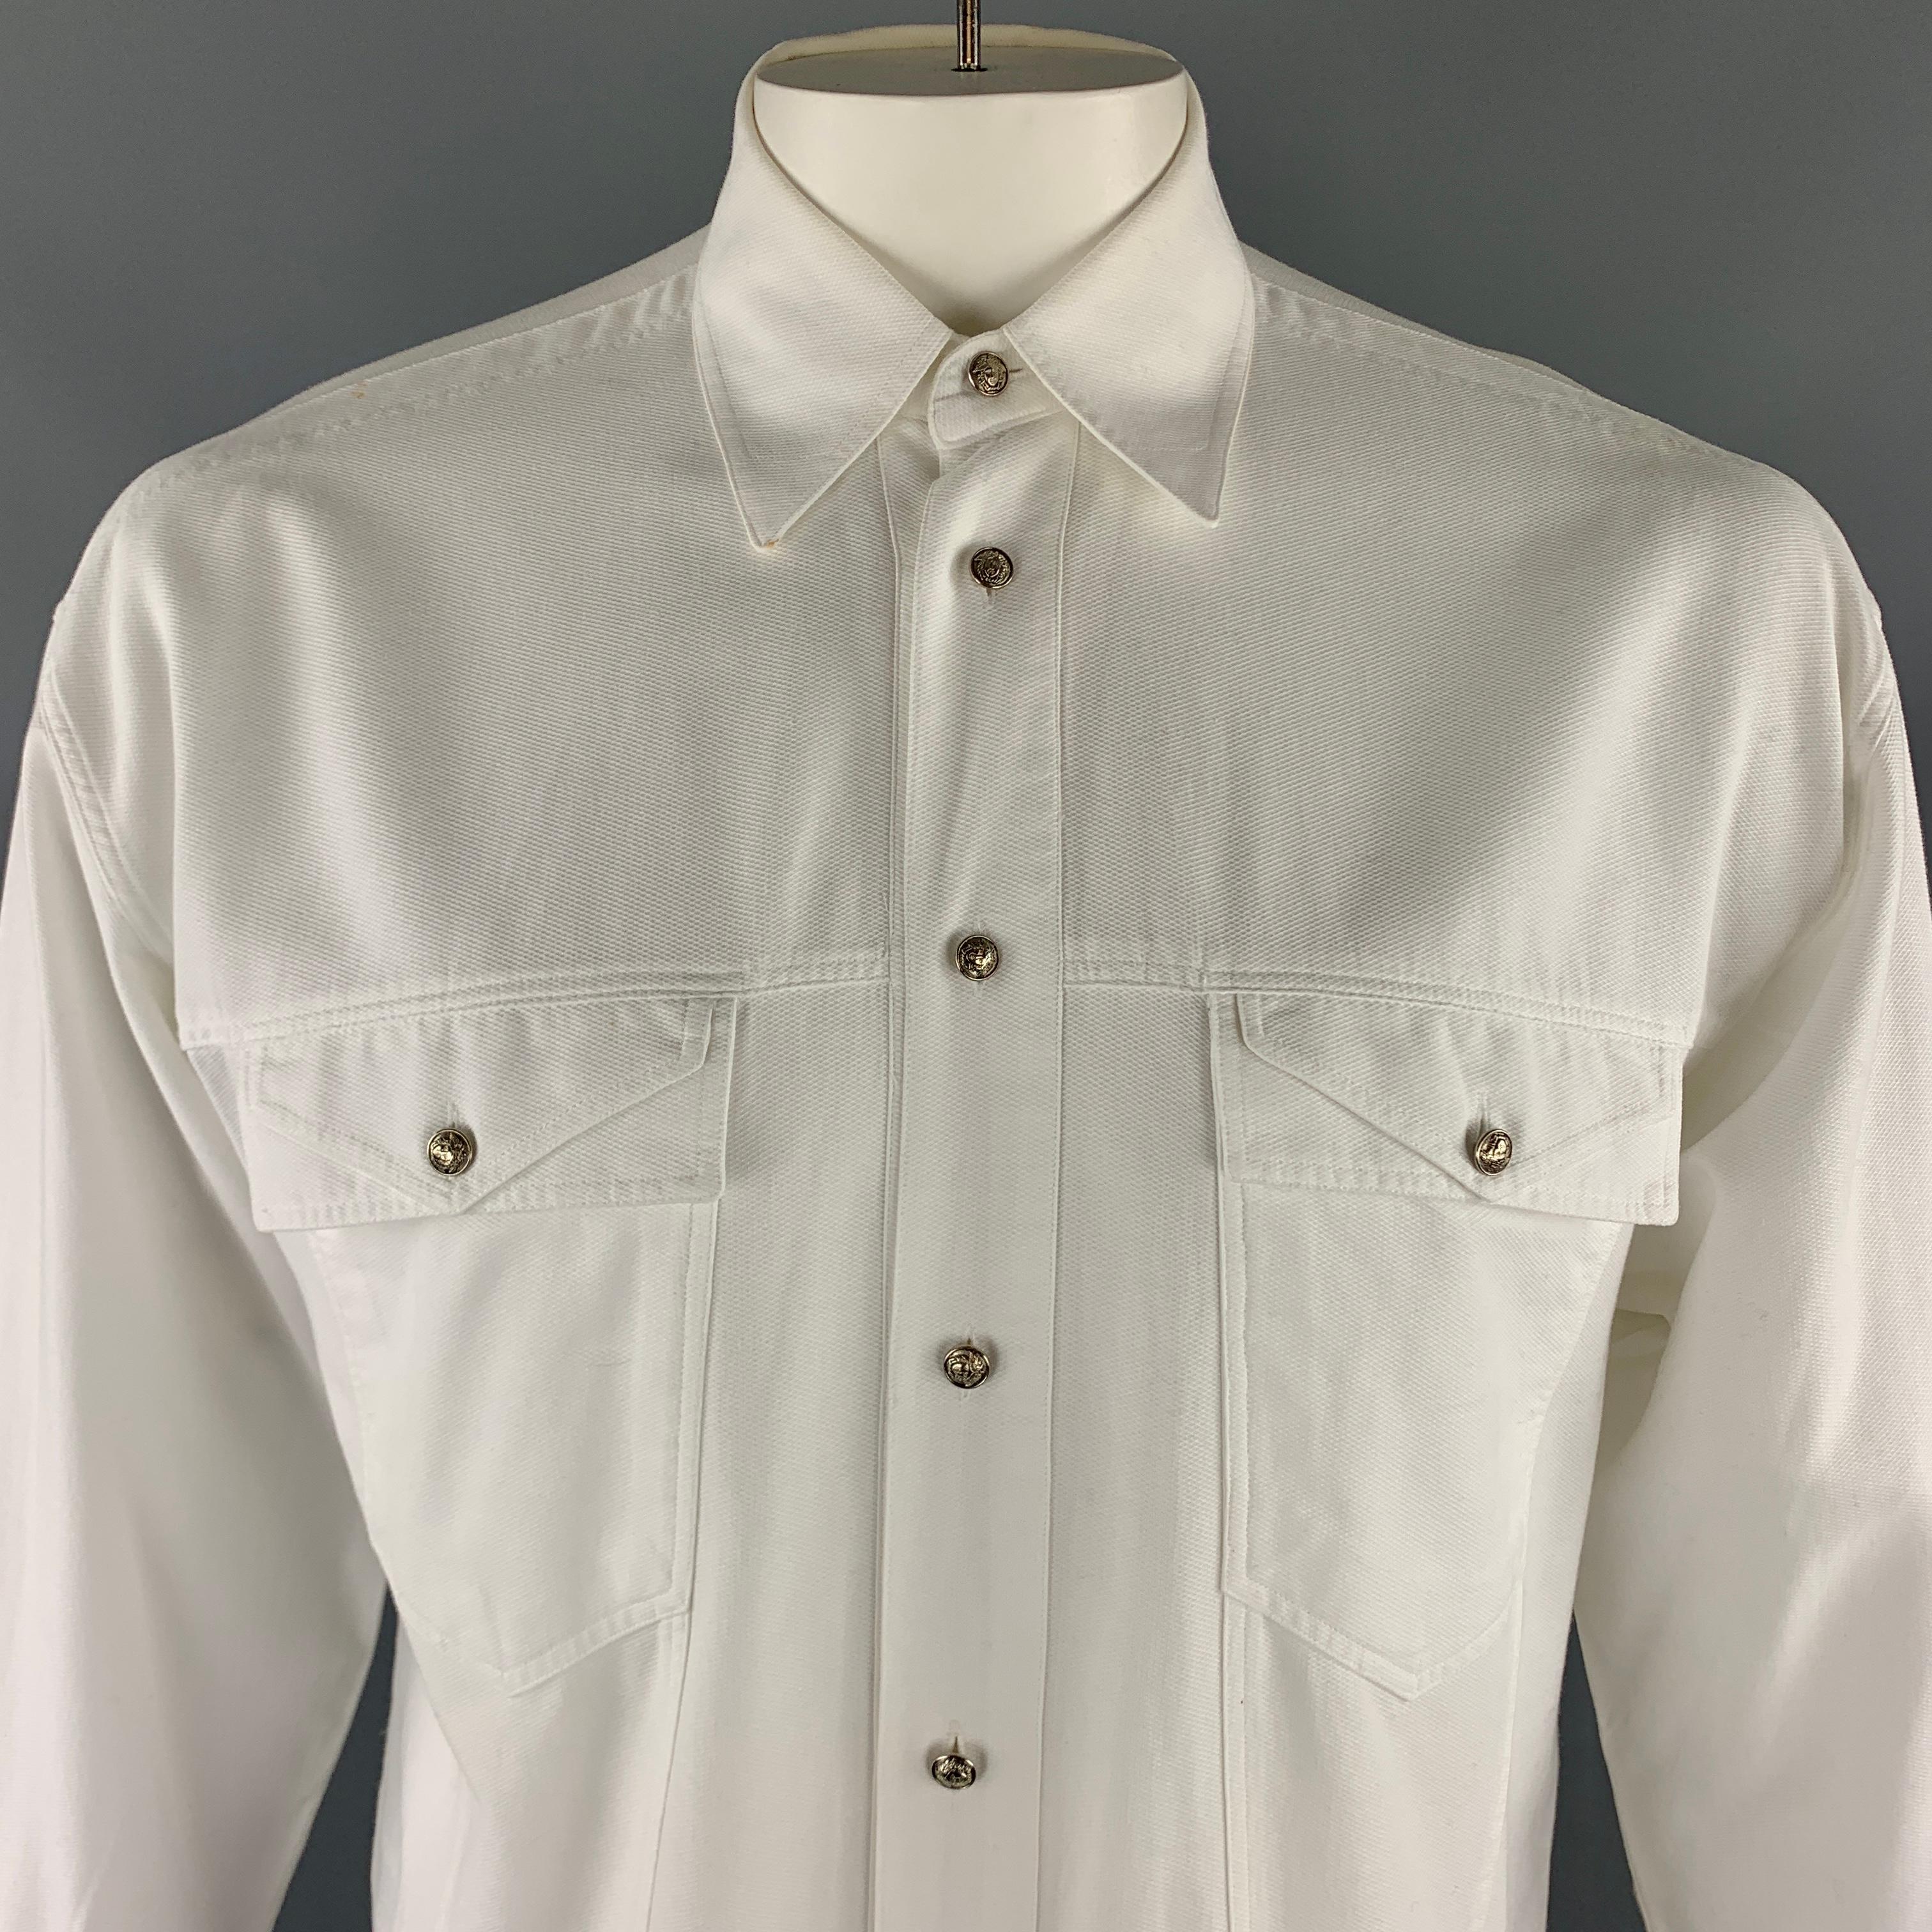 Vintage VERSACE JEANS COUTURE jacket comes in a solid white cotton material, featuring a buttoned front, patch pockets, buttoned cuffs, and silver tone metal medusa embossed buttons, button up. As is. Made in Italy. 

Very Good Pre-Owned